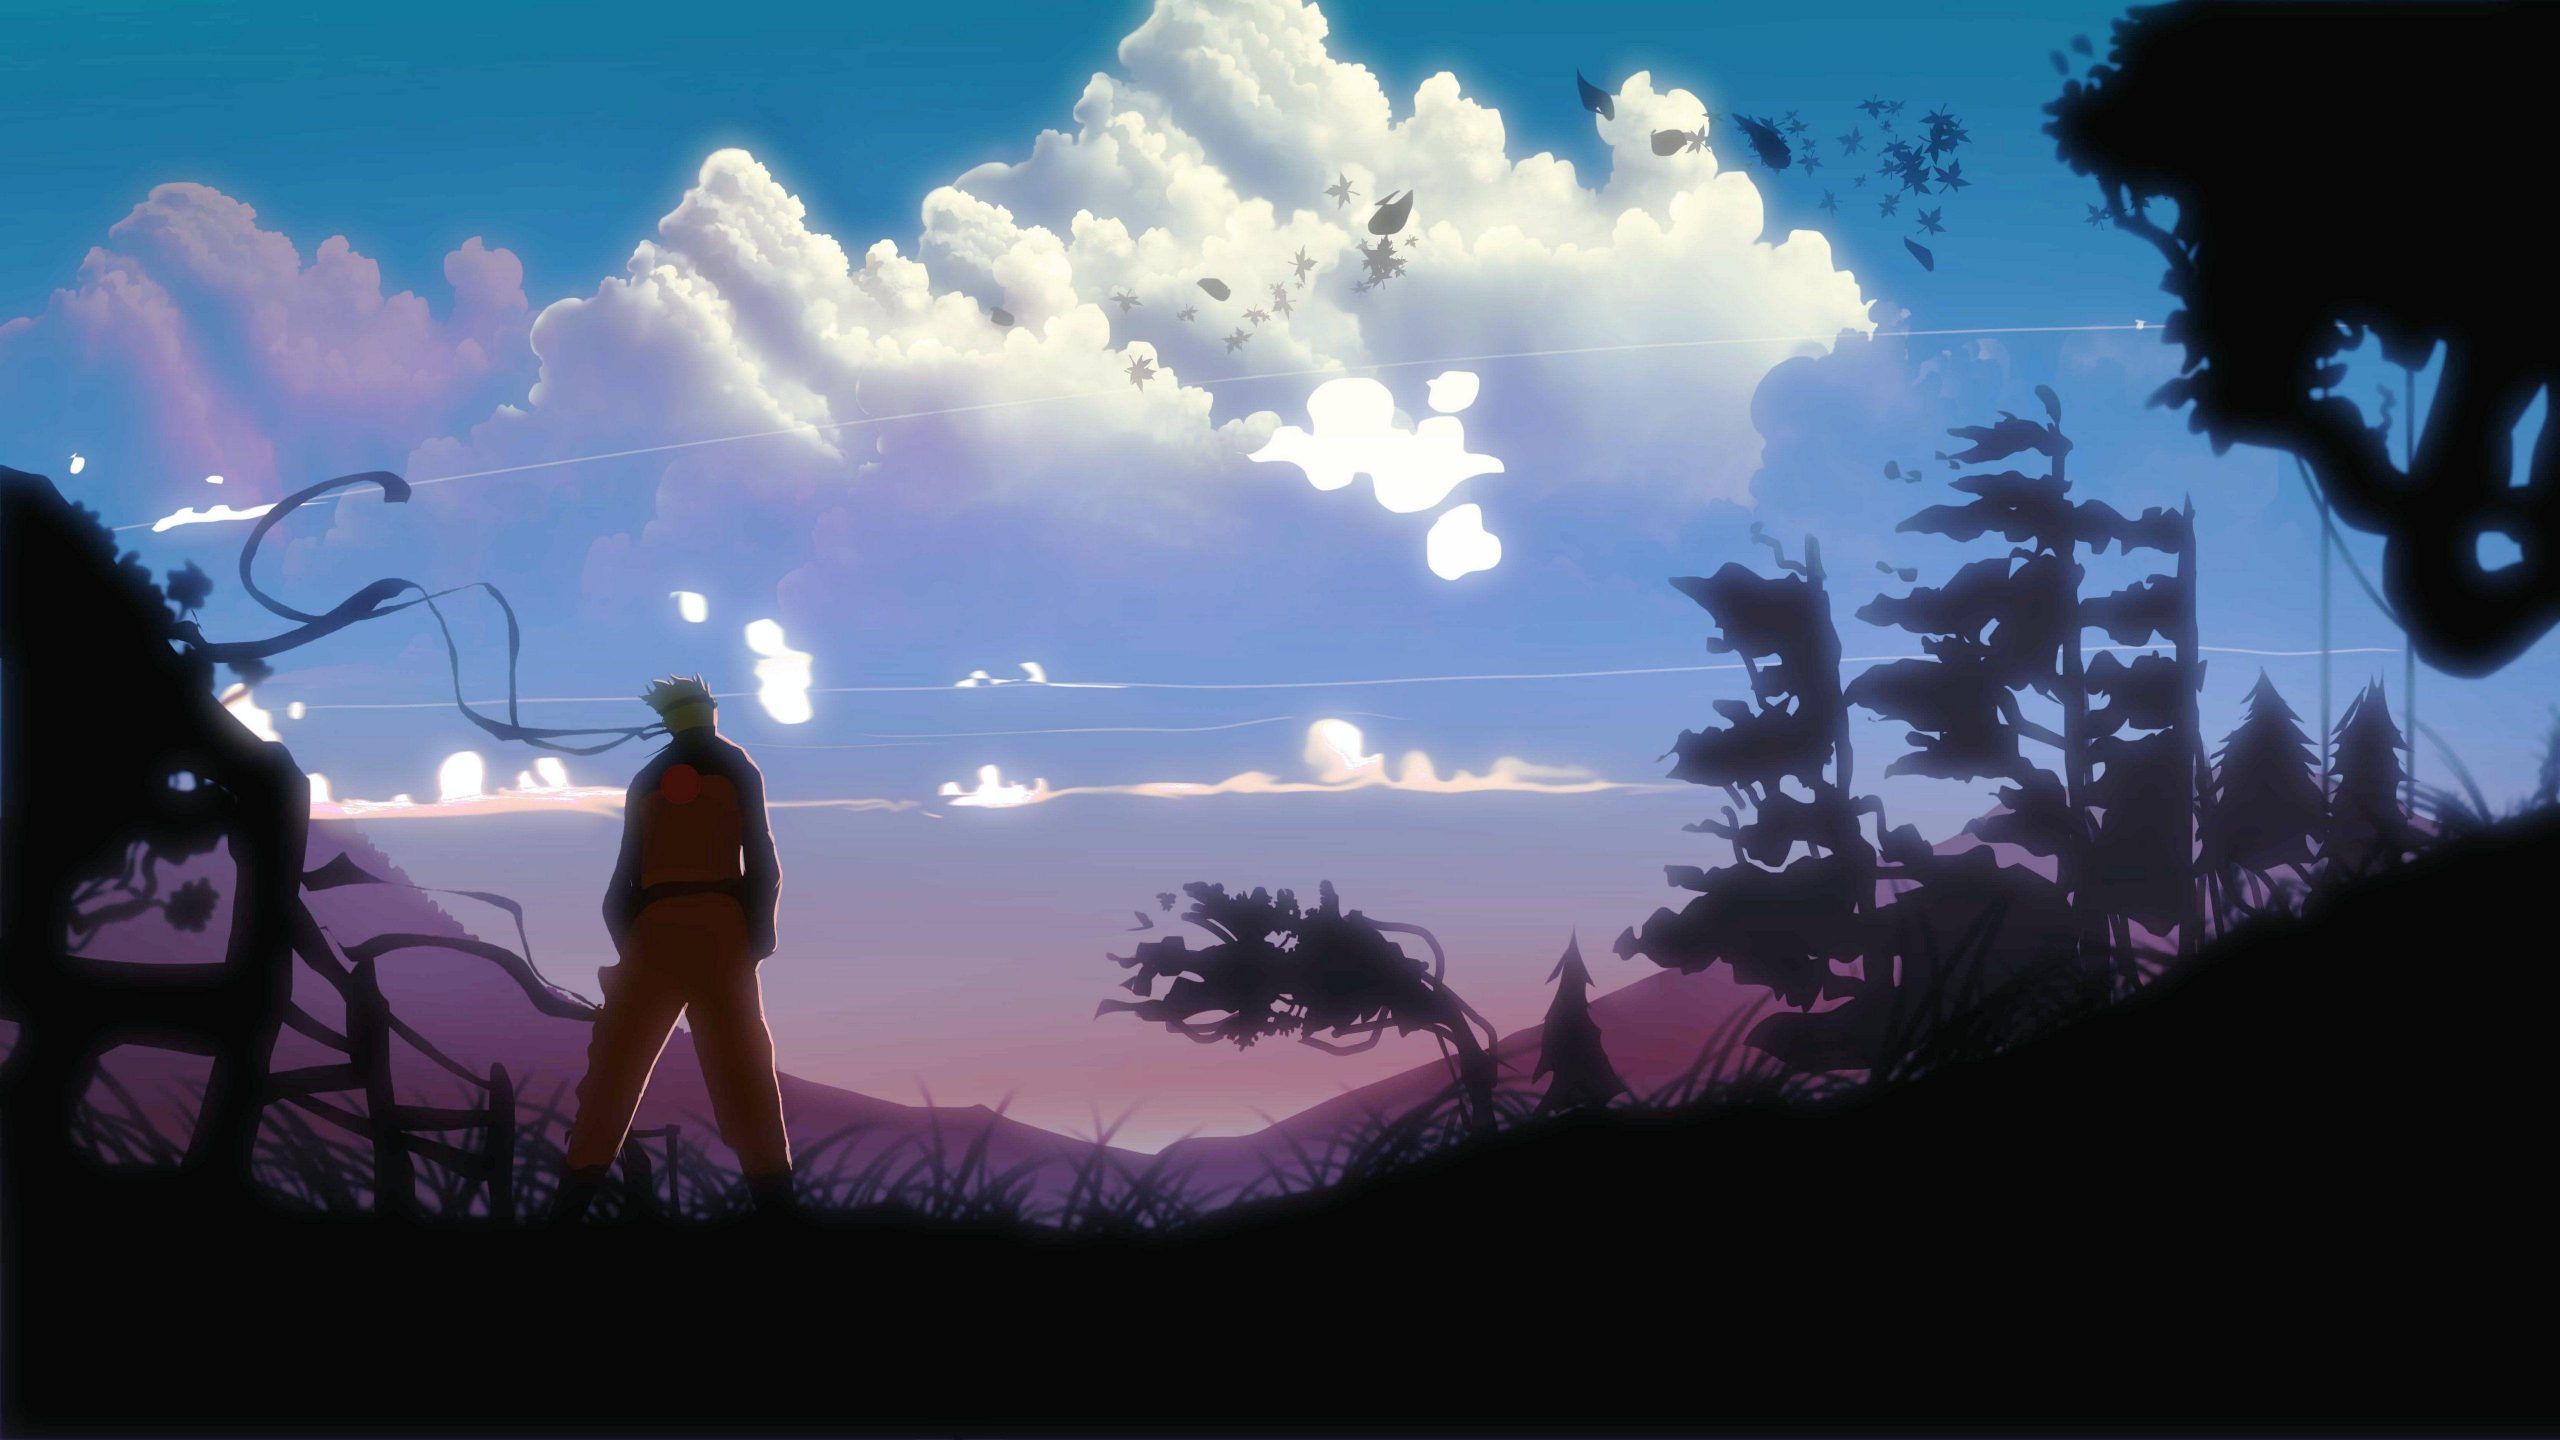 Naruto Wallpaper For Pc PNG. Landscape wallpaper, Naruto wallpaper, Best naruto wallpaper